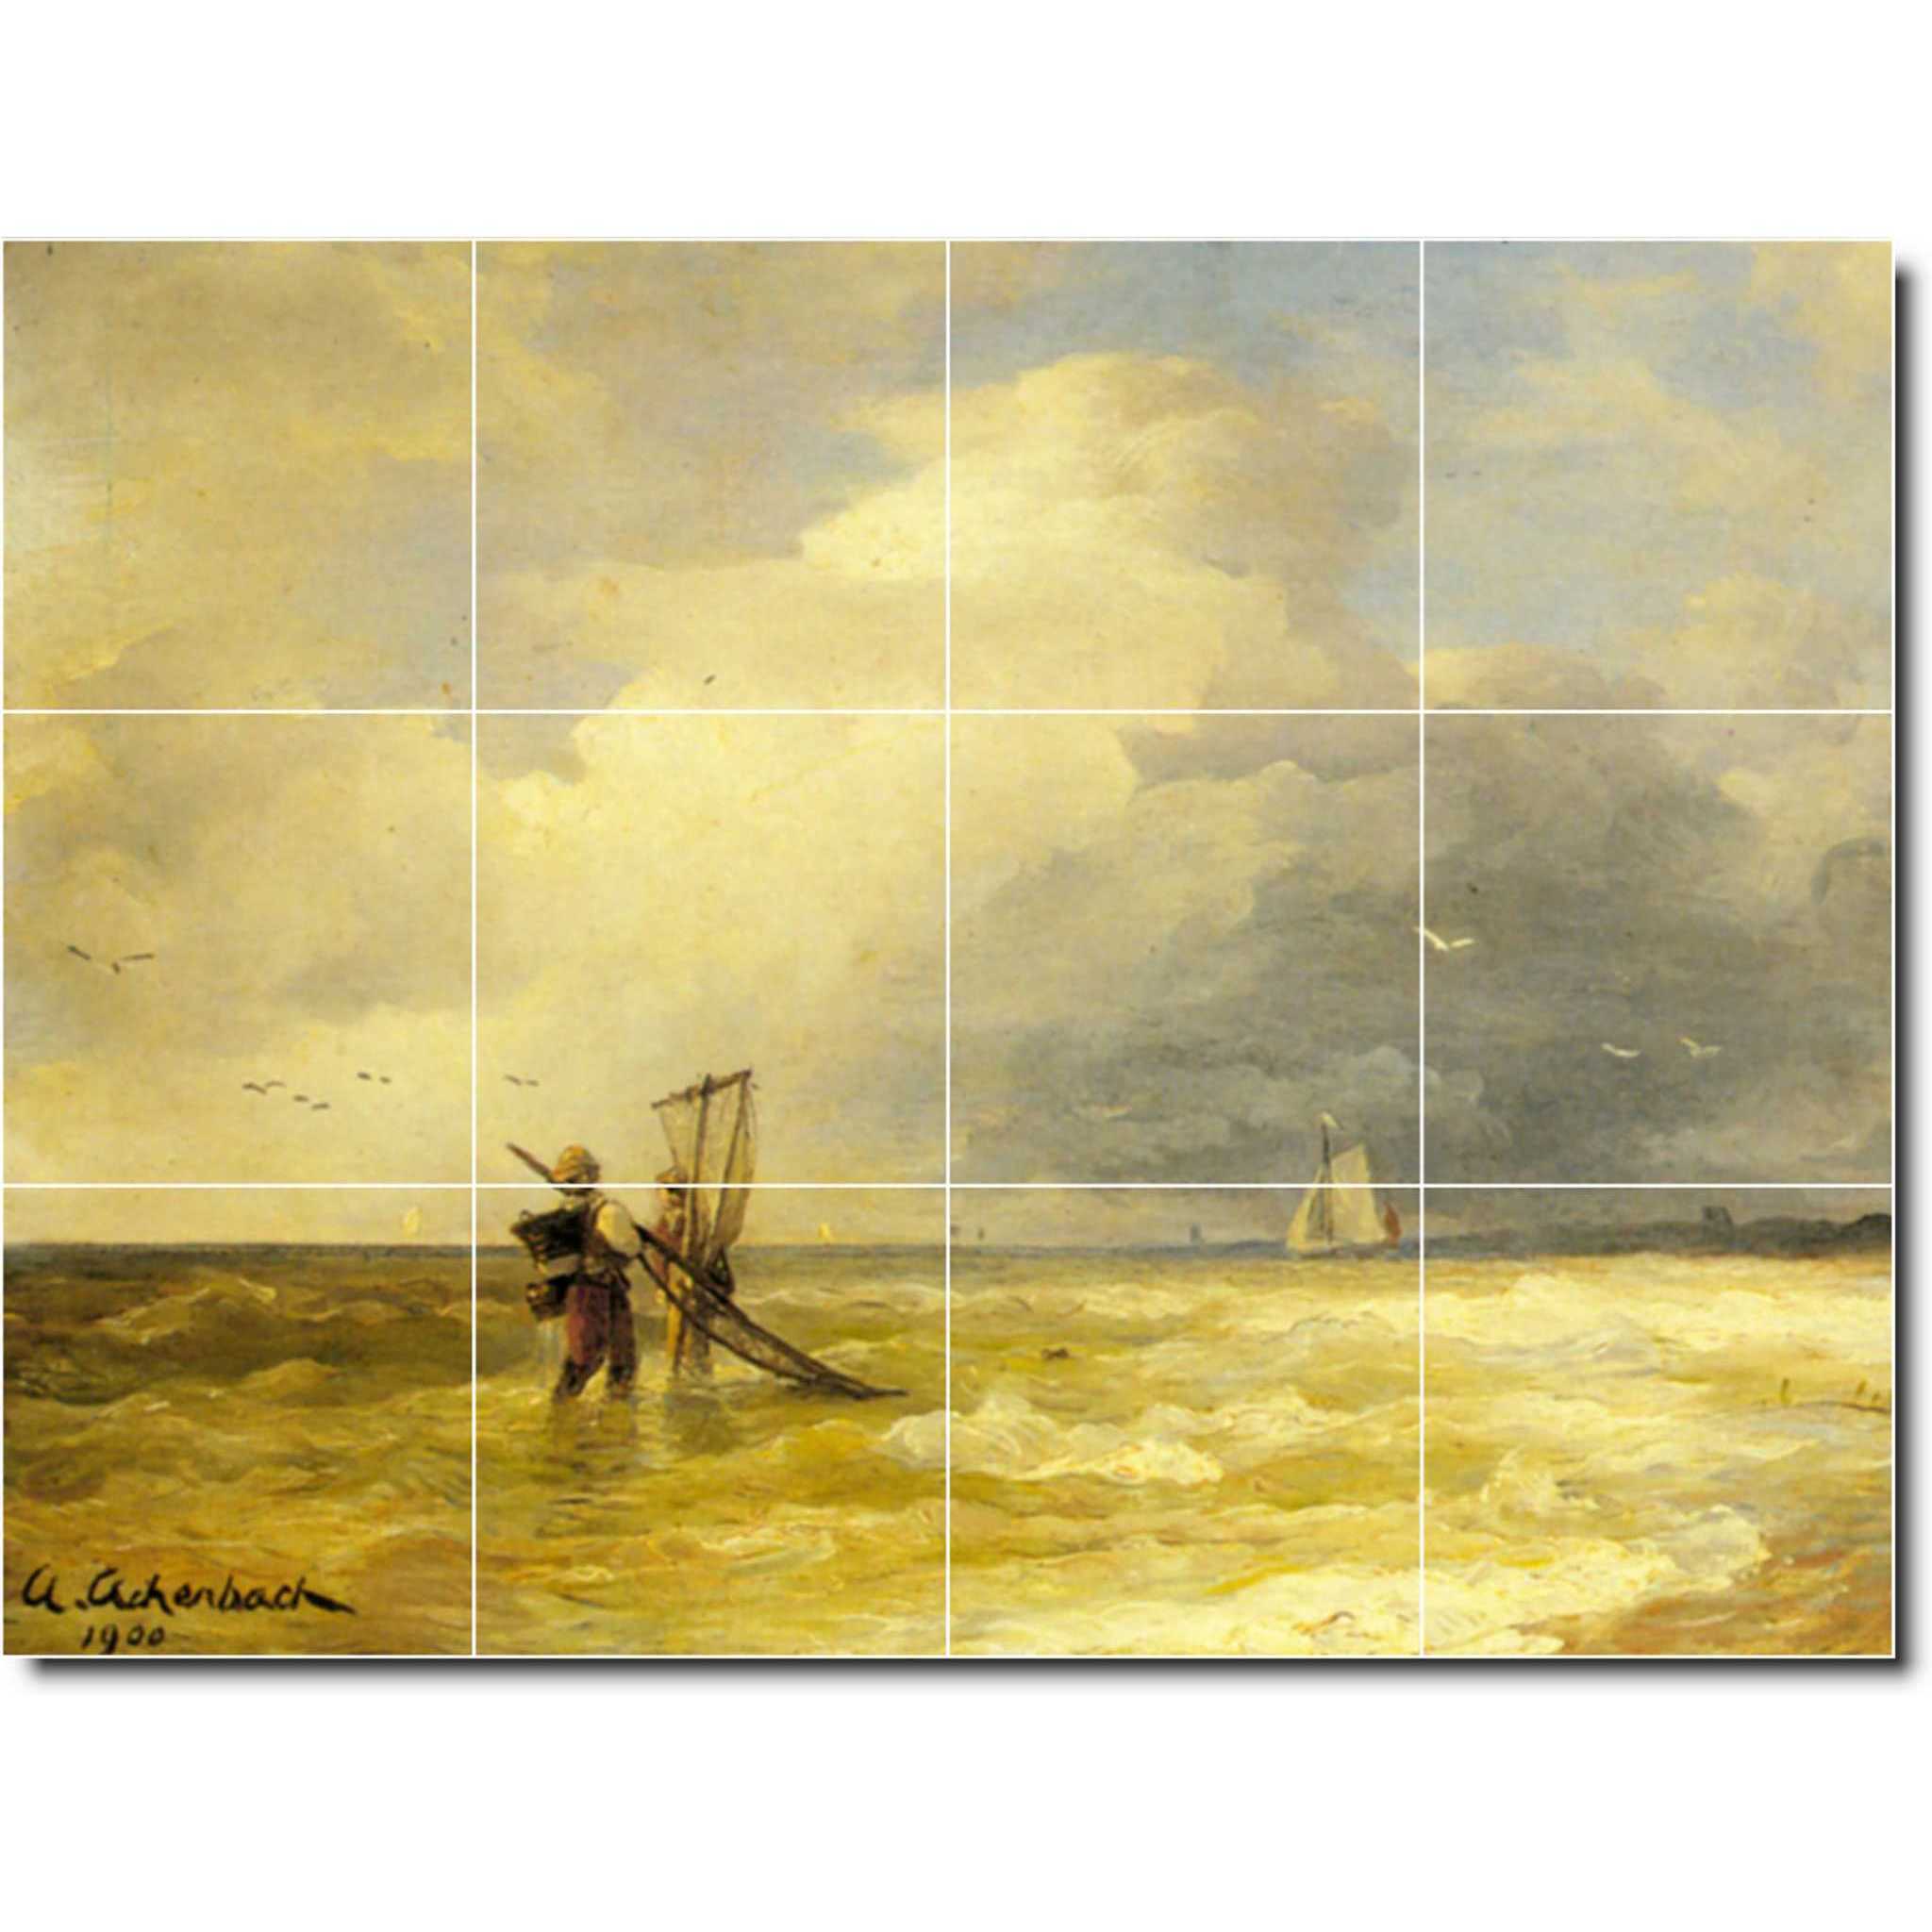 andreas achenbach waterfront painting ceramic tile mural p00007